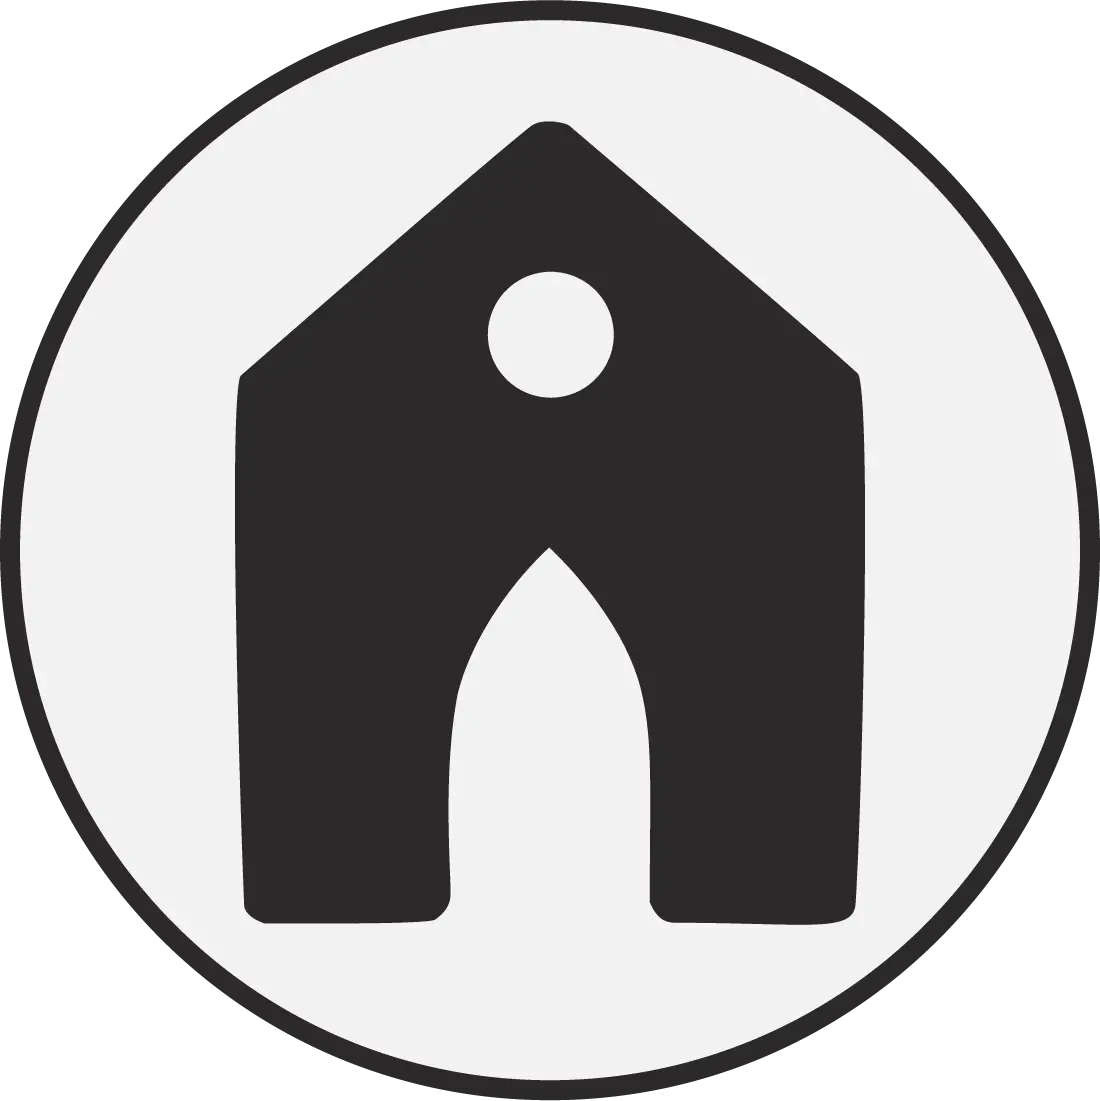 A black and white picture of an object in the shape of a house.